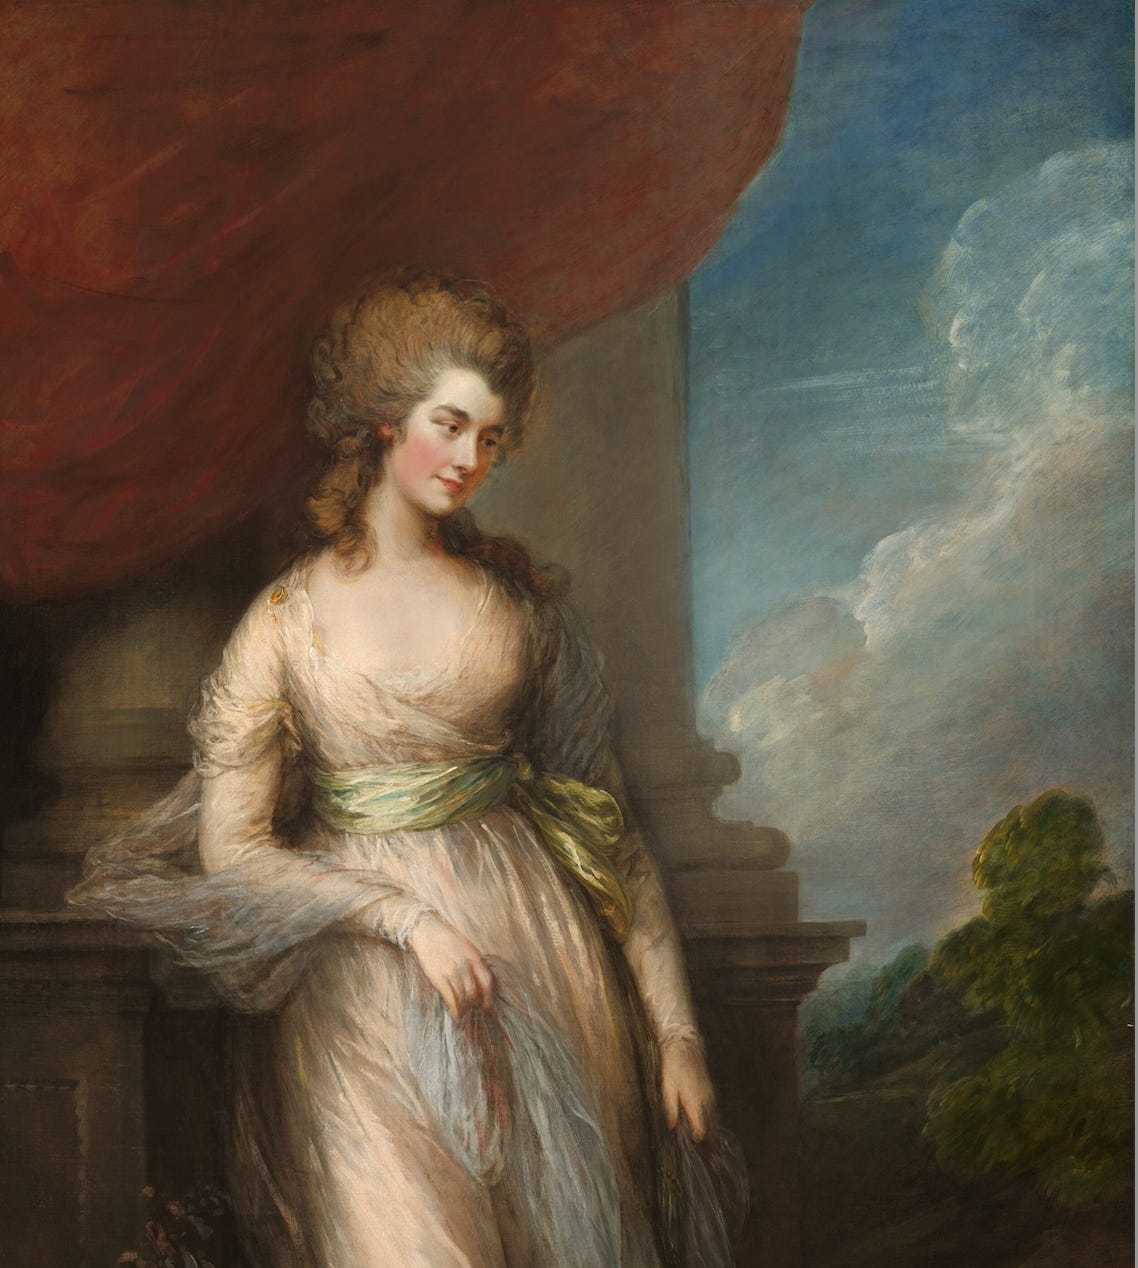 Georgiana, Duchess of Devonshire, by painter Thomas Gainsborough, 1783, from the collection of the National Gallery of Art, Andrew W. Mellon collection.